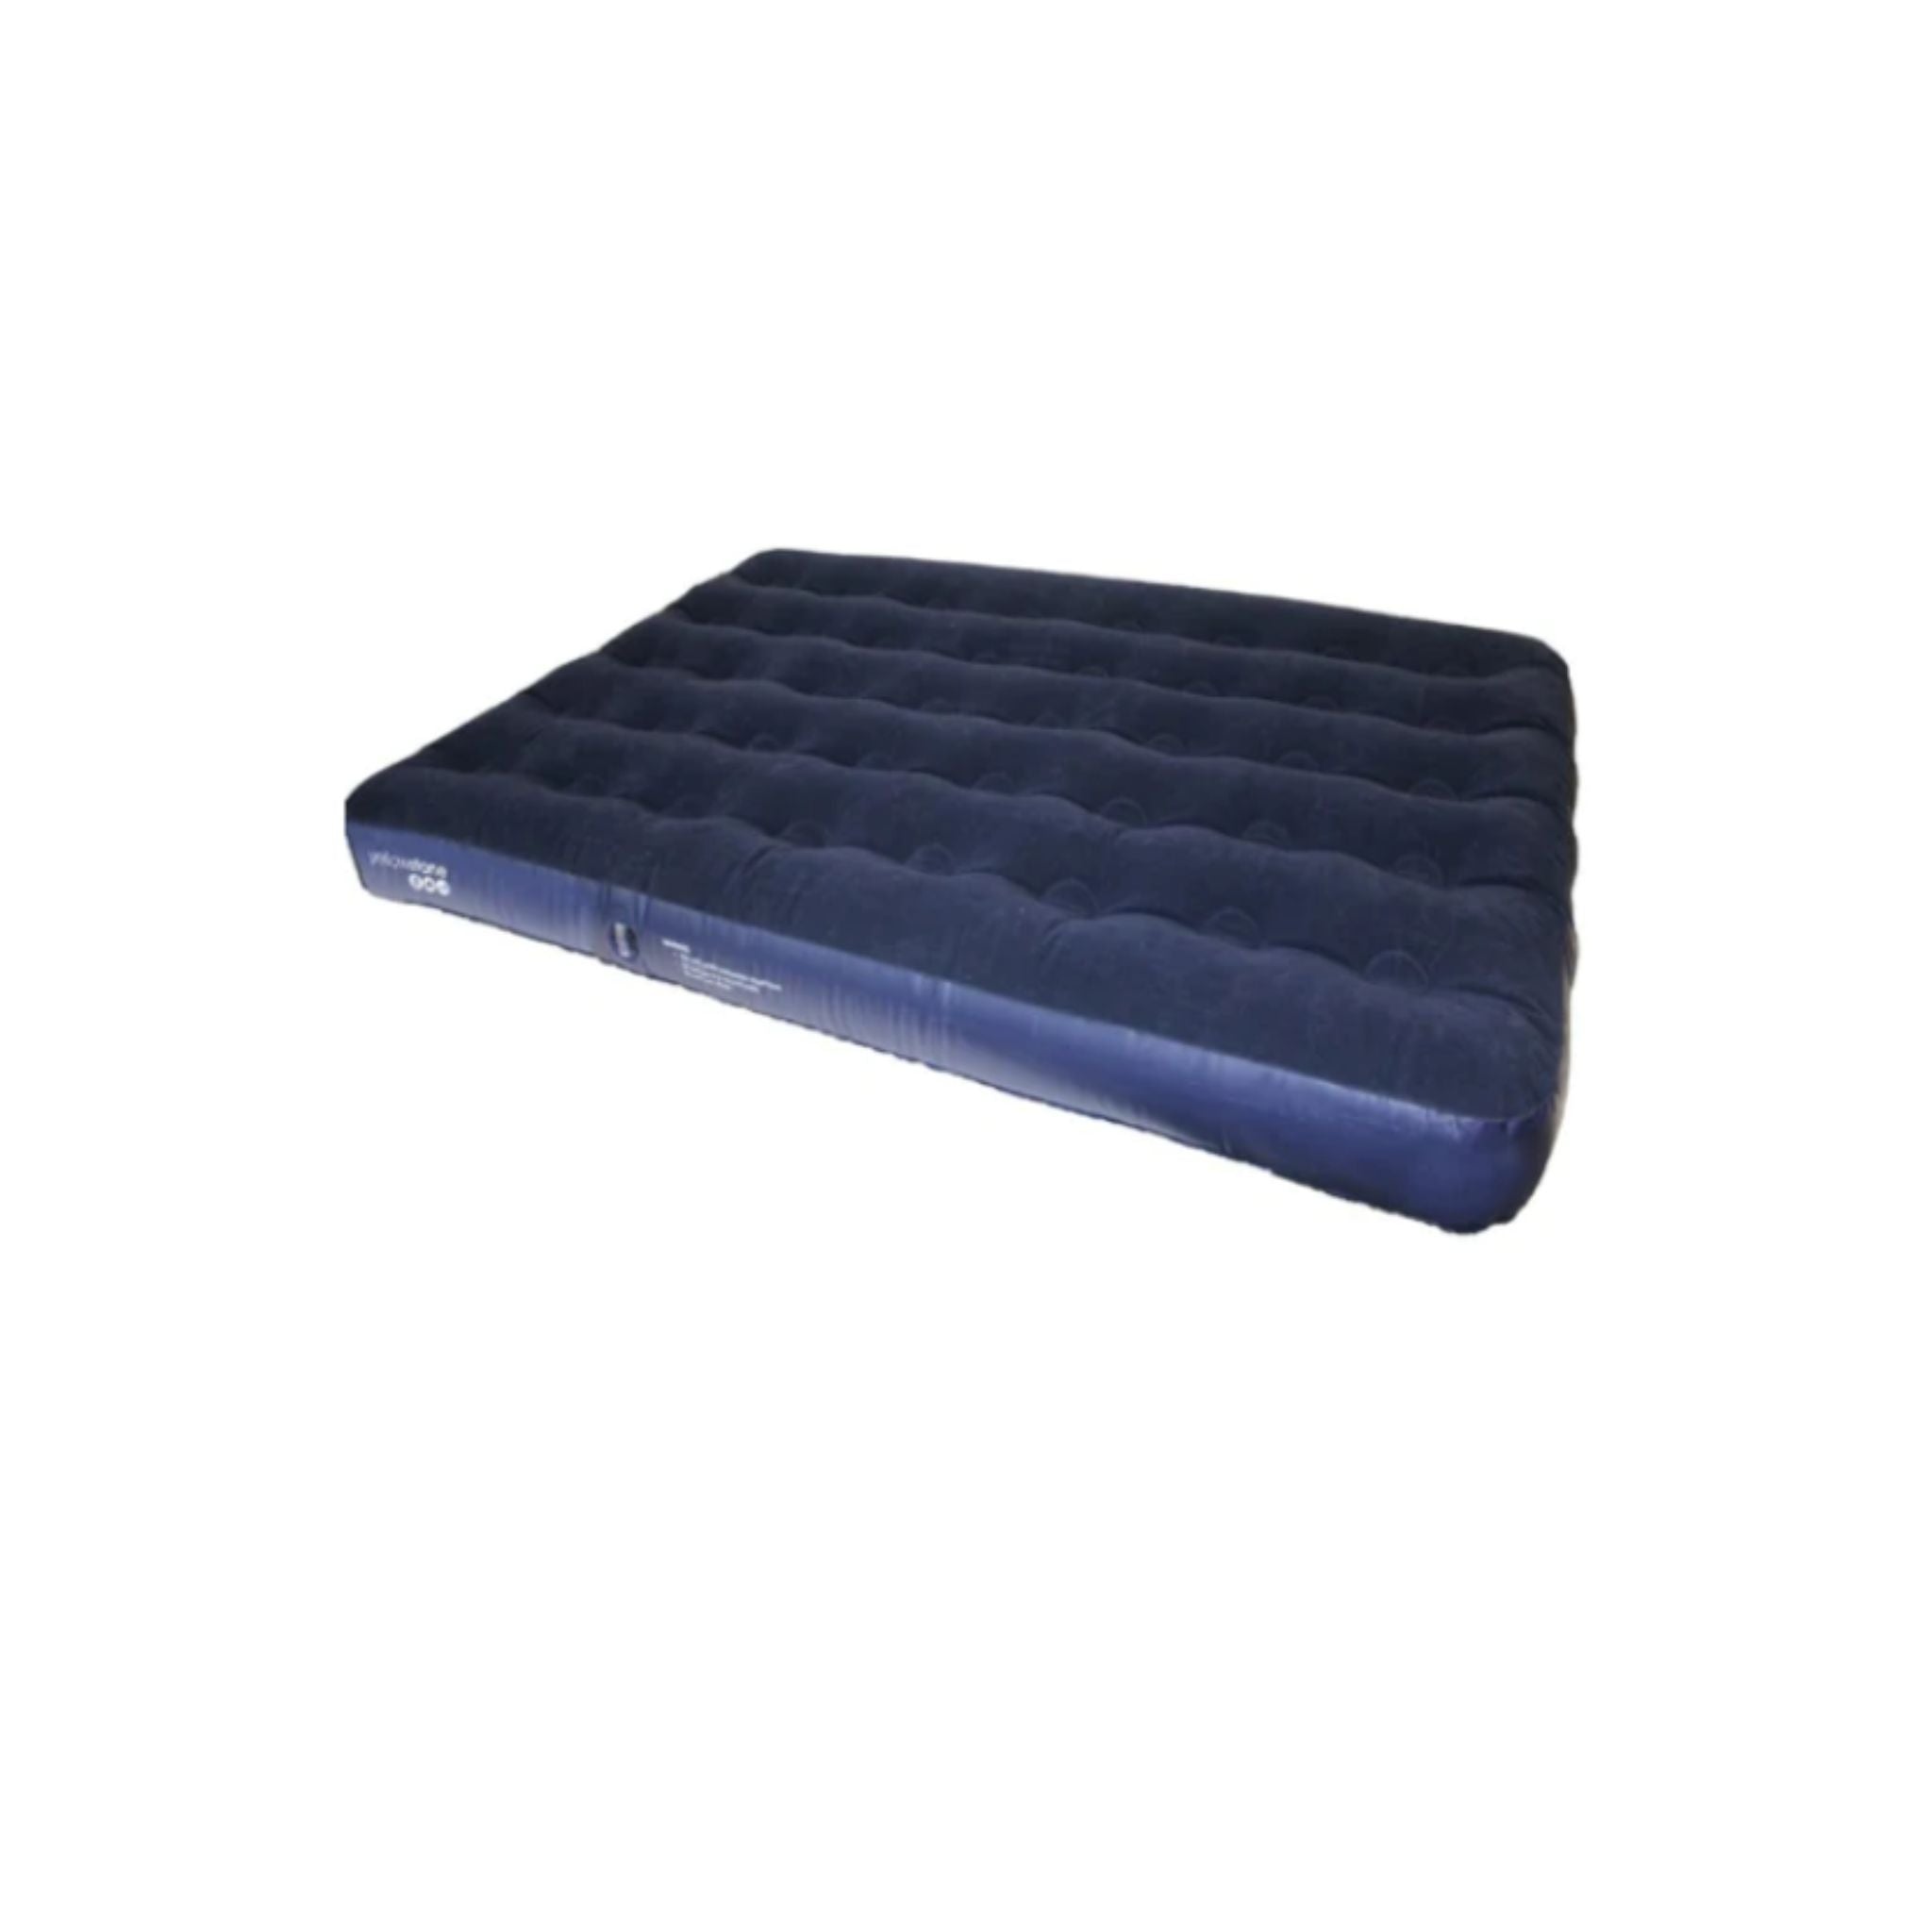 Rock n River Double Flock Airbed | Rock N River | Portwest - The Outdoor Shop